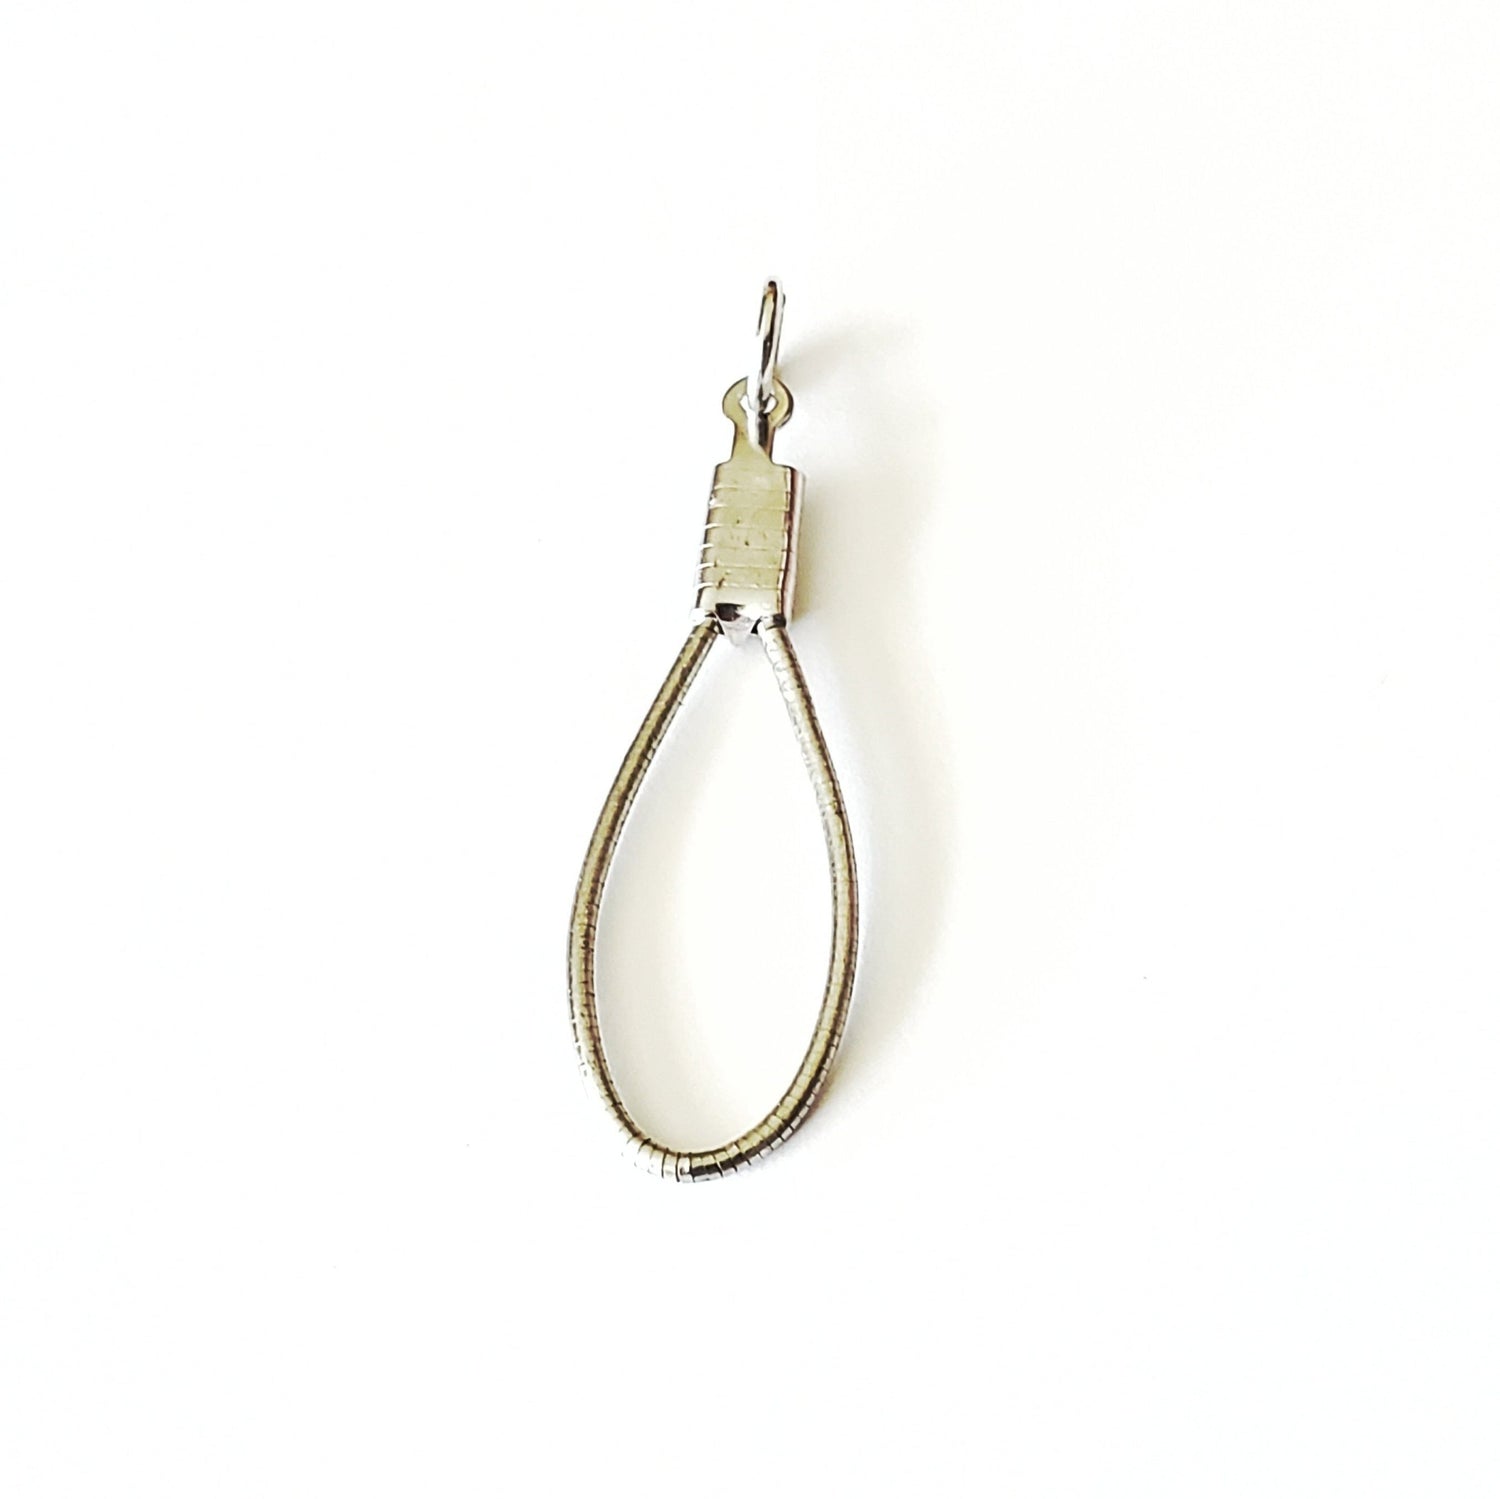 a silver coloured pendant made from an upcycled cello string - white background